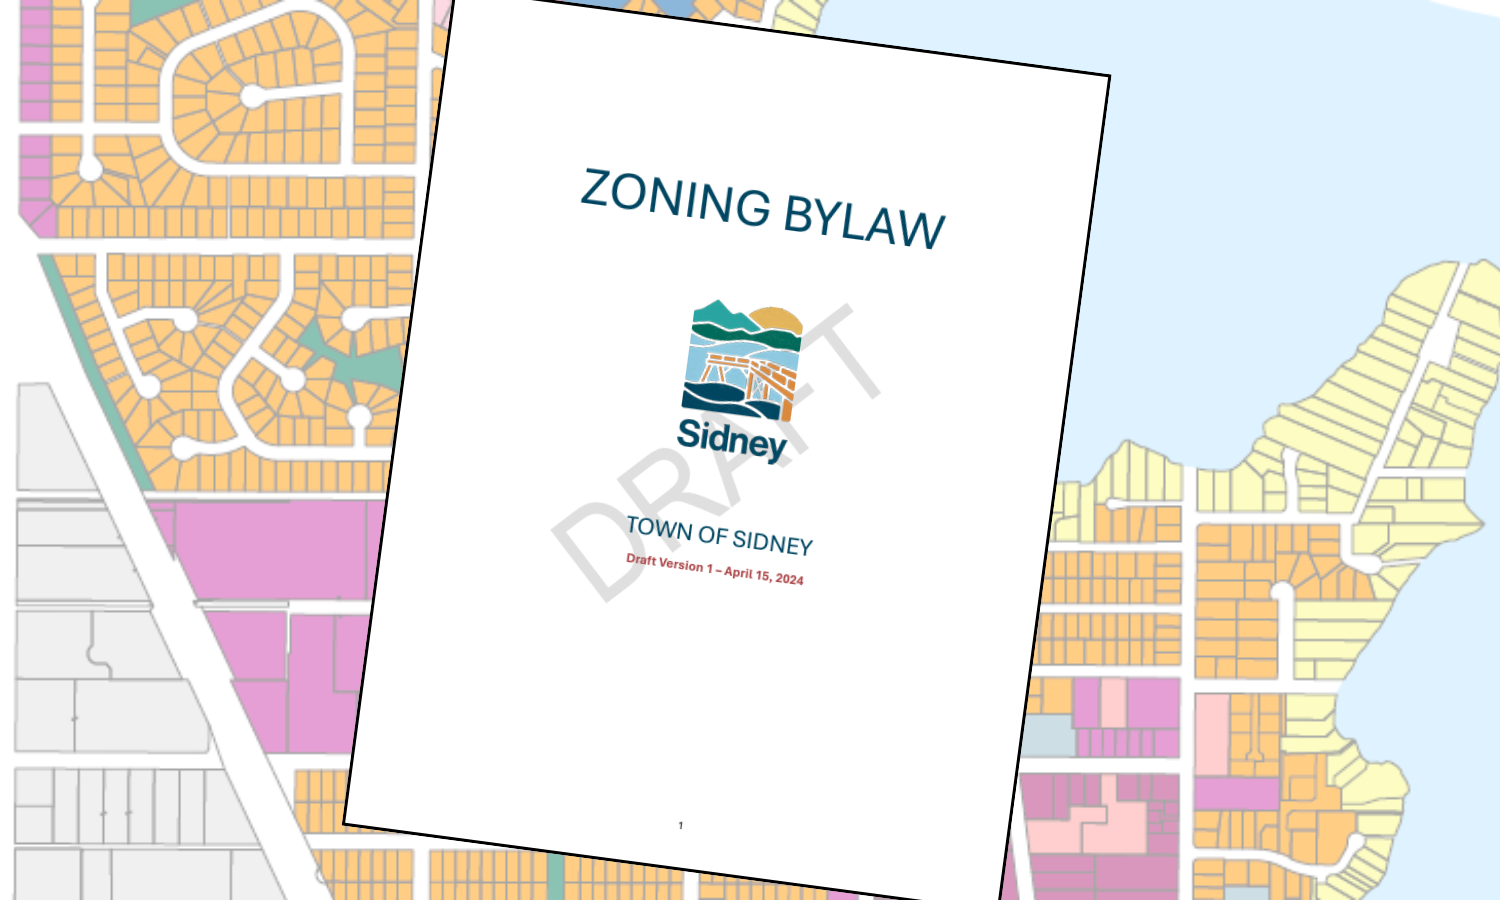 Graphic: Draft Zoning Bylaw and Map